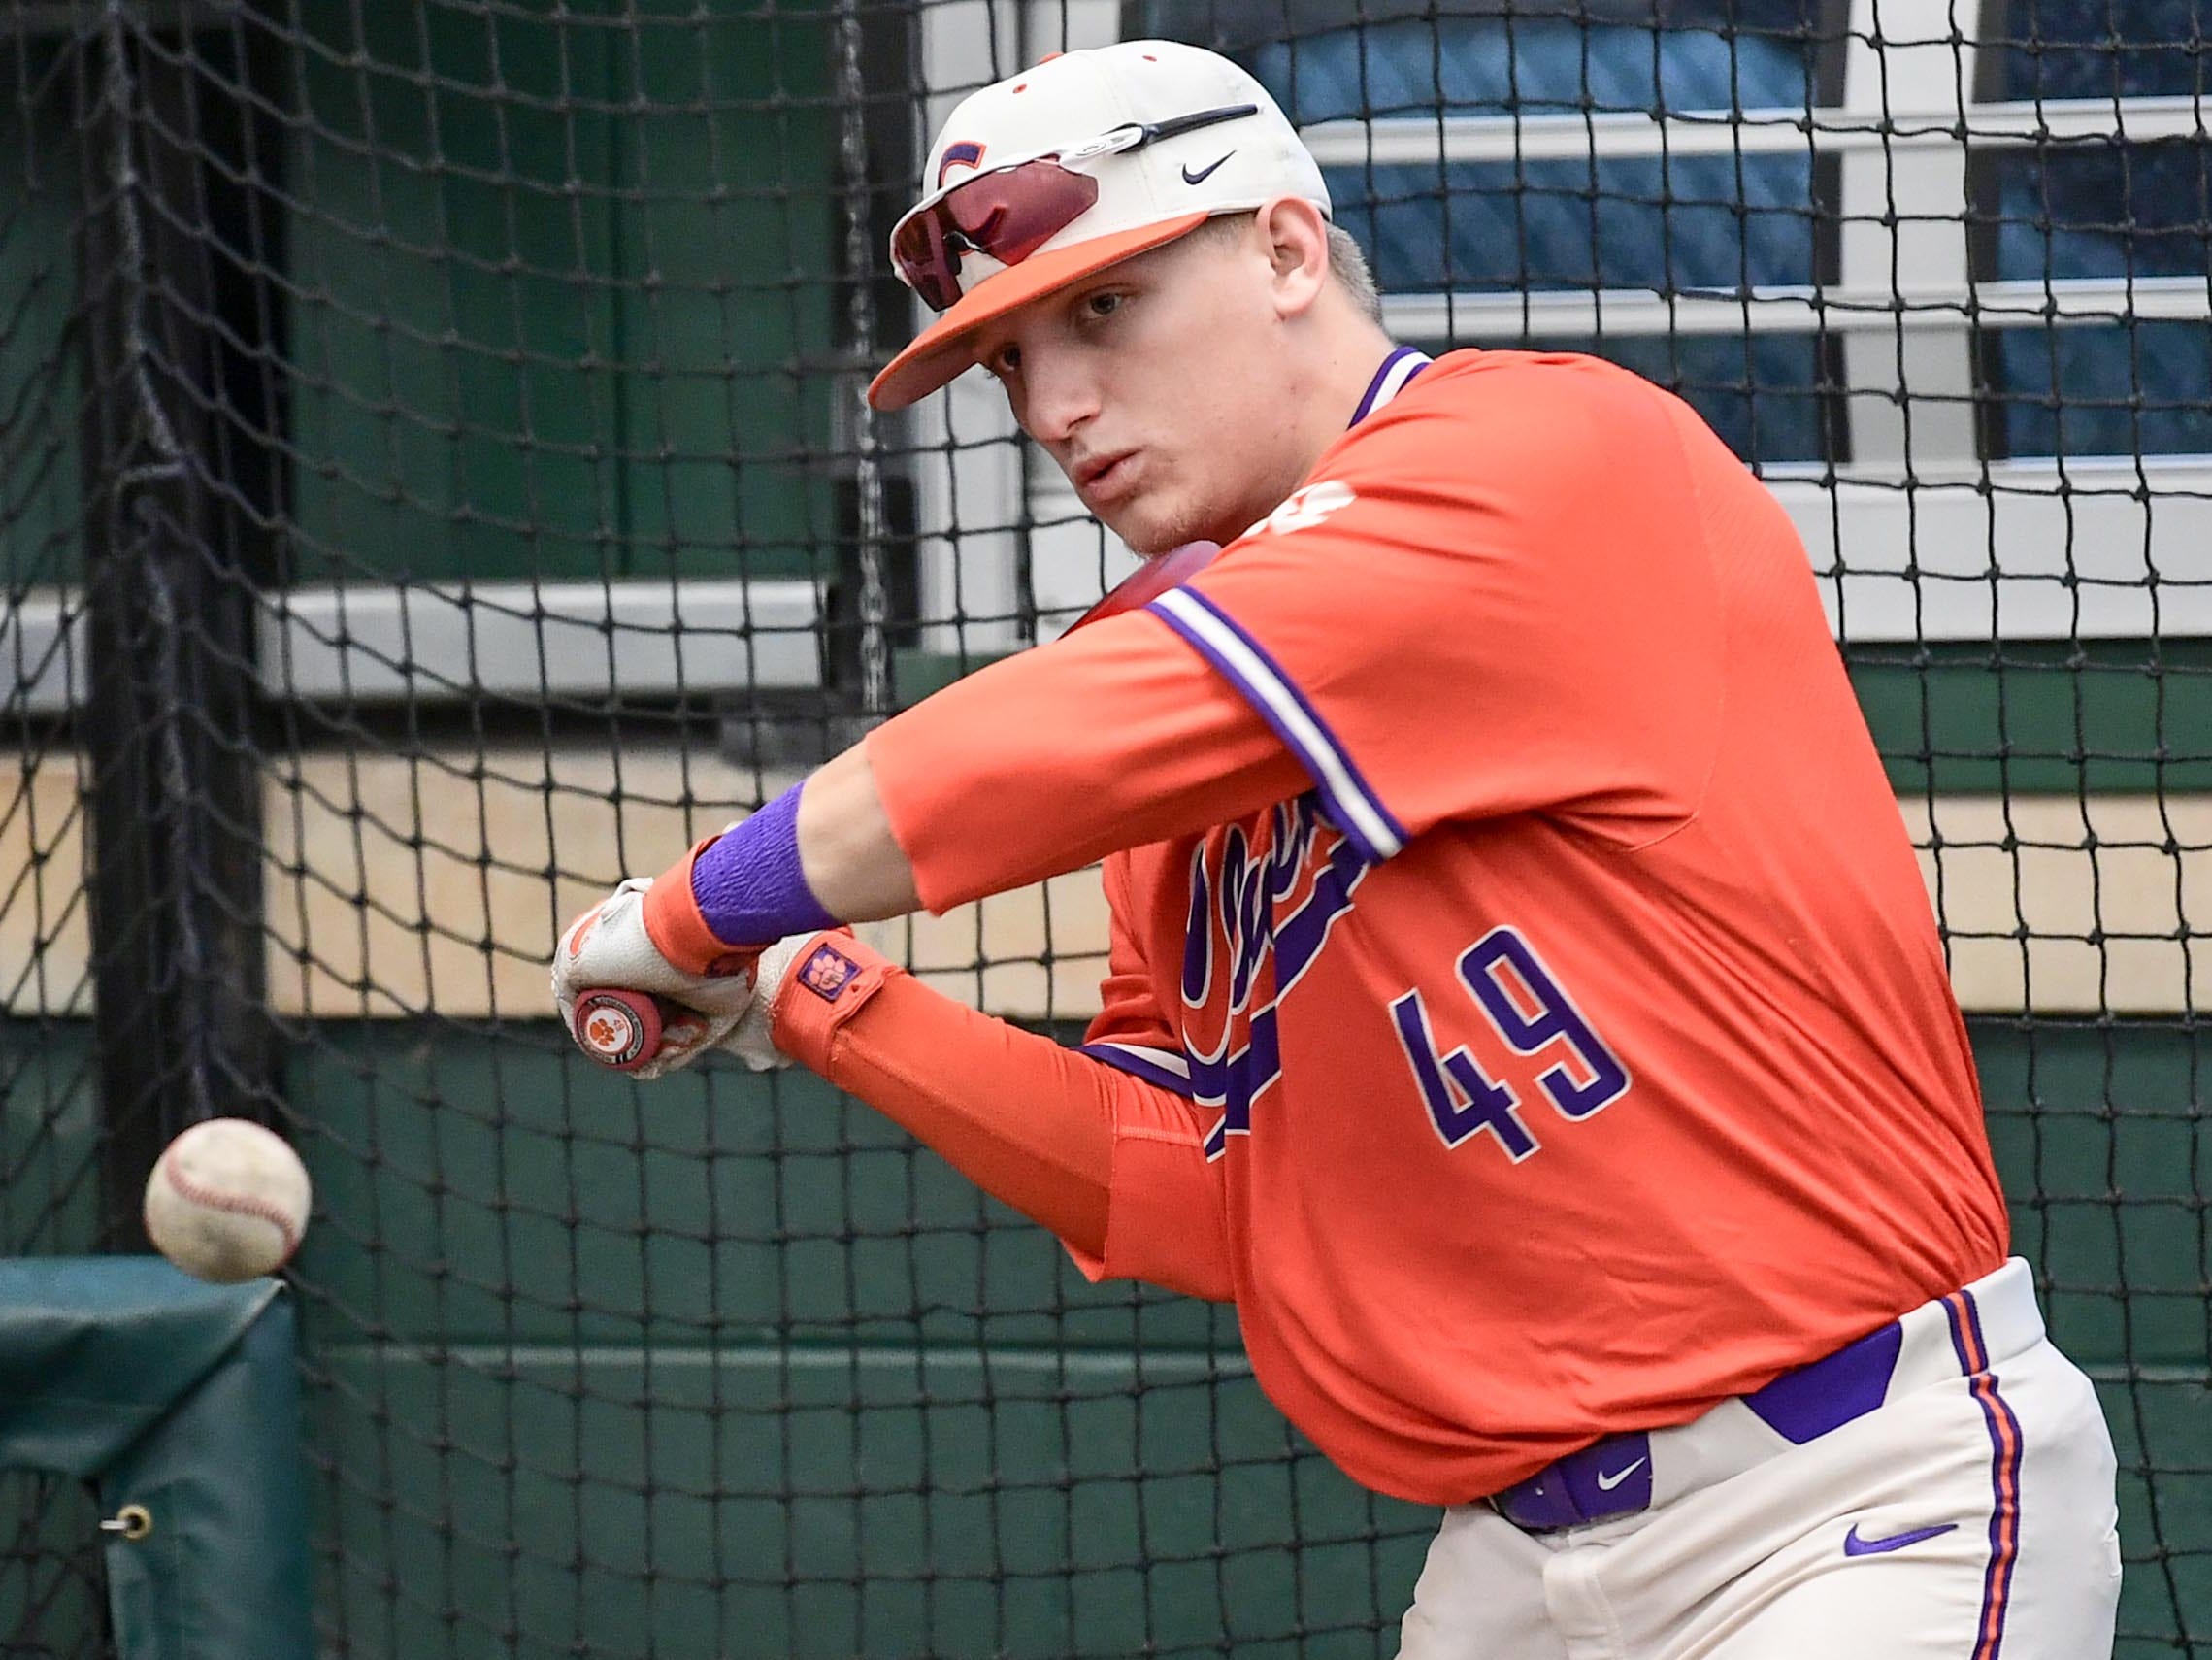 Clemson freshman Regan Reid(49), former T.L. Hanna High standout, swings during the first official team Spring practice at Doug Kingsmore Stadium in Clemson Friday, January 24, 2020.